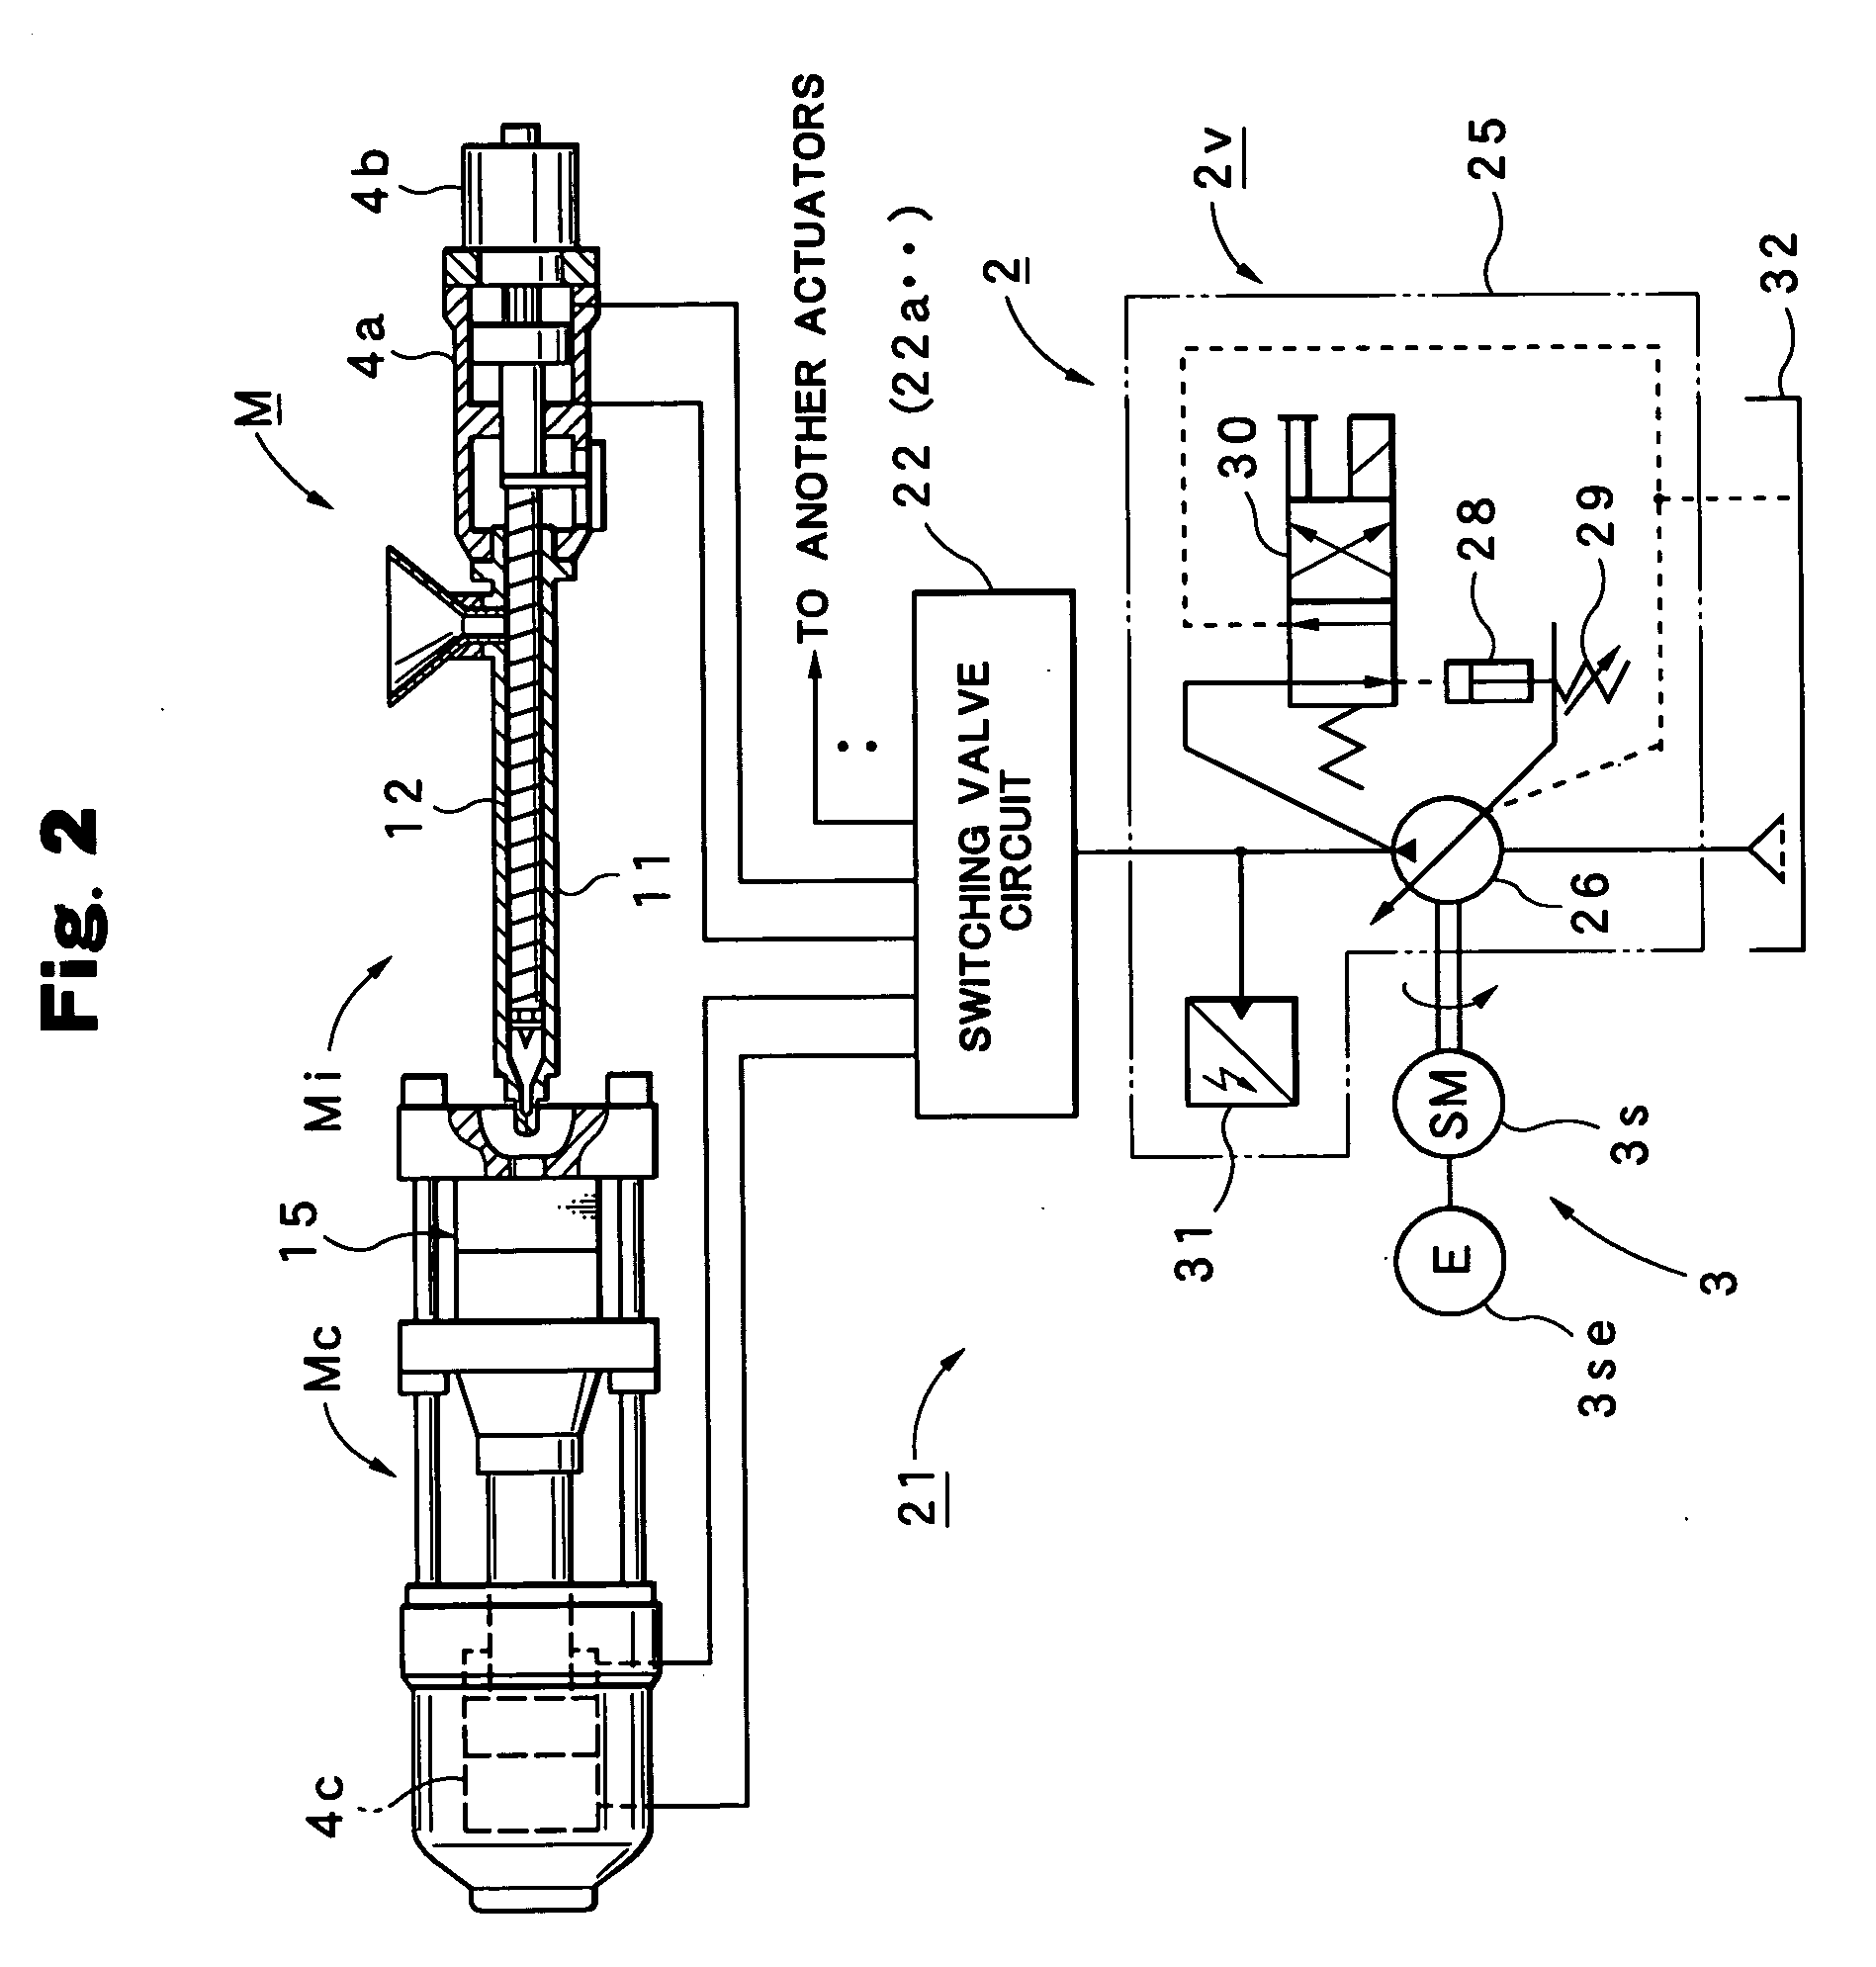 Method of controlling an injection molding machine